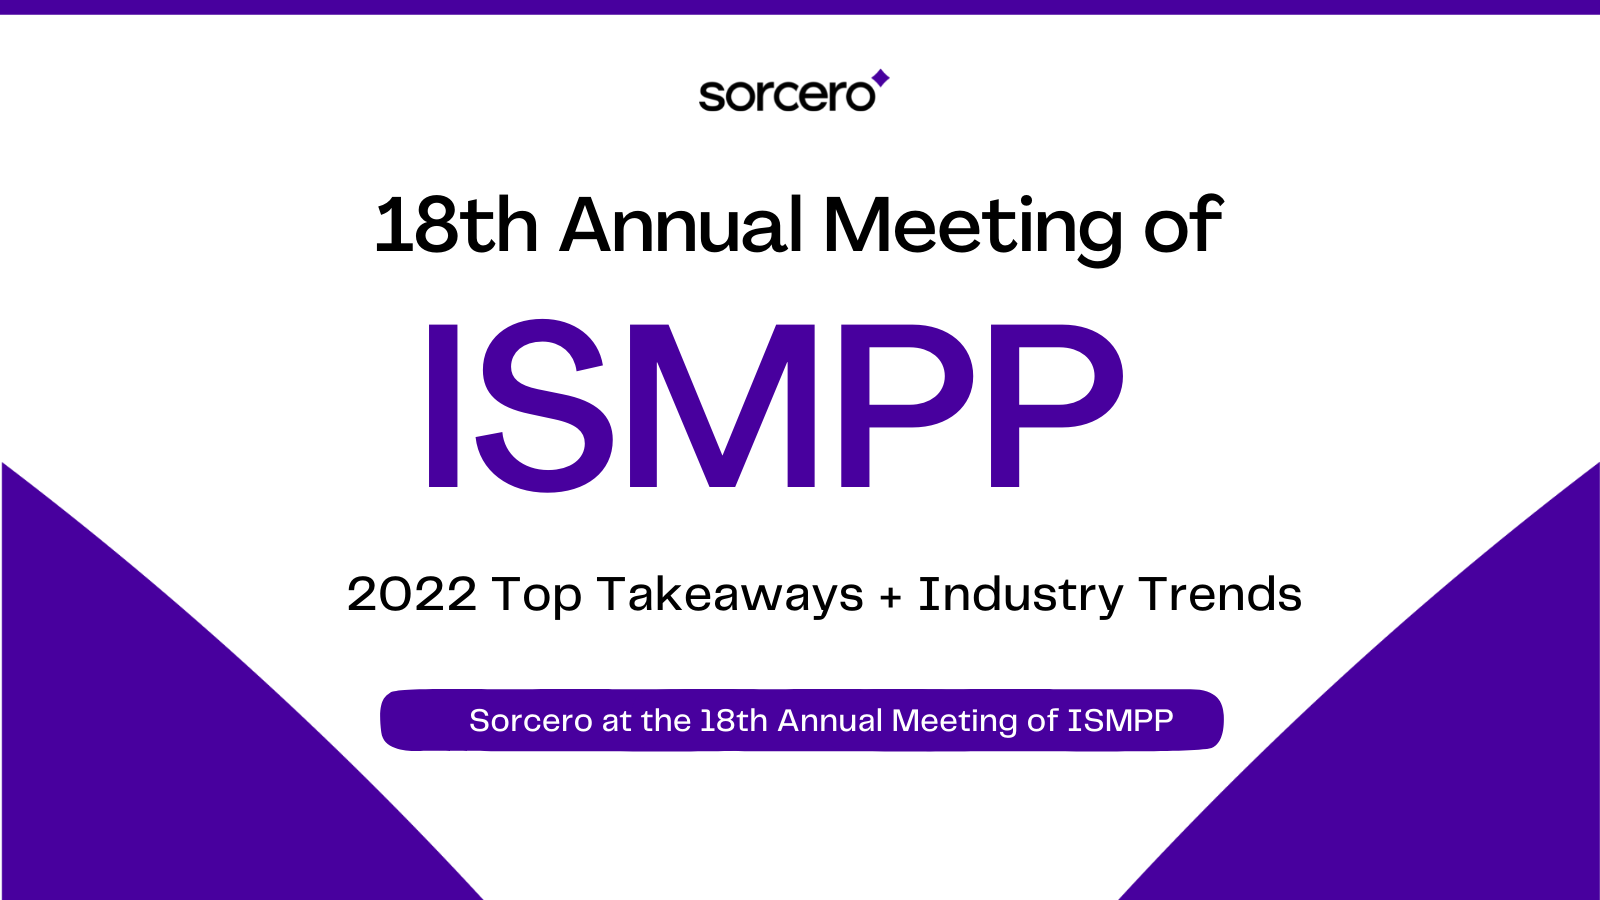 The 18th Annual Meeting of ISMPP: 2022 Top Takeaways + Industry Trends